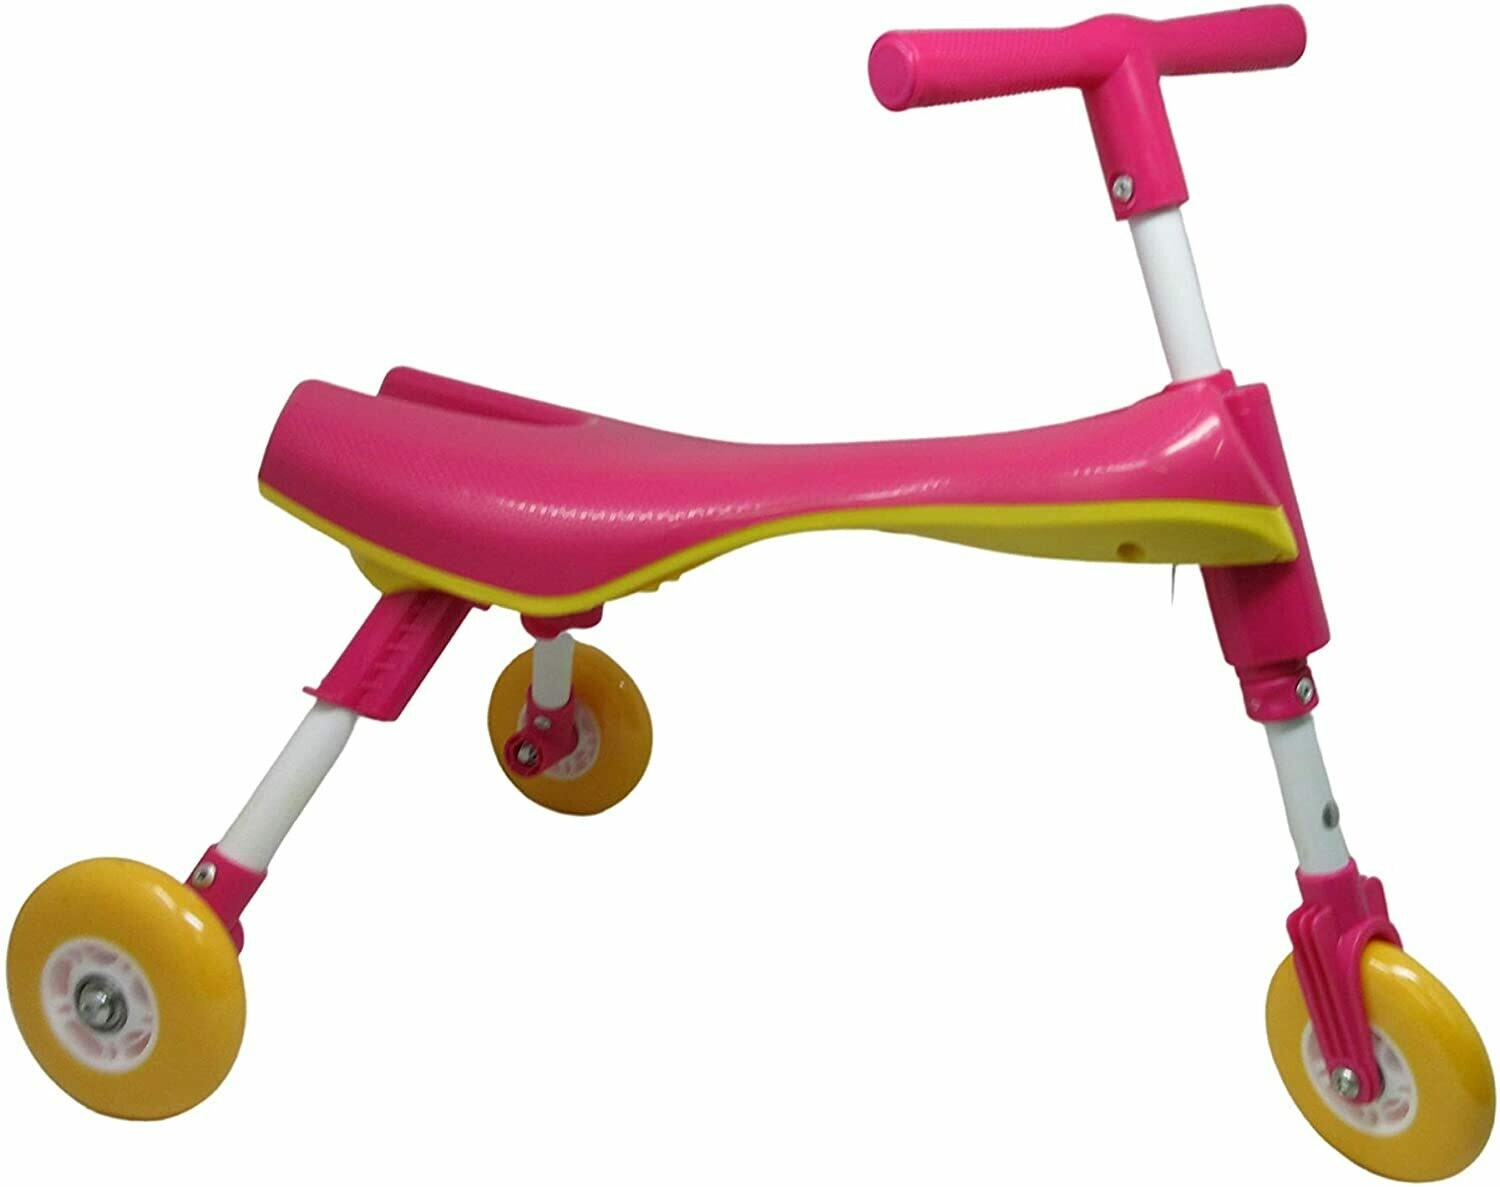 SUPER TOYS Folding trike Baby Tricycle | Walker Scuttle Bug scooter 43cm | Comfortable Ride On Children&#39;s Super Wheel Toddlers’ Tricycle (Pink)